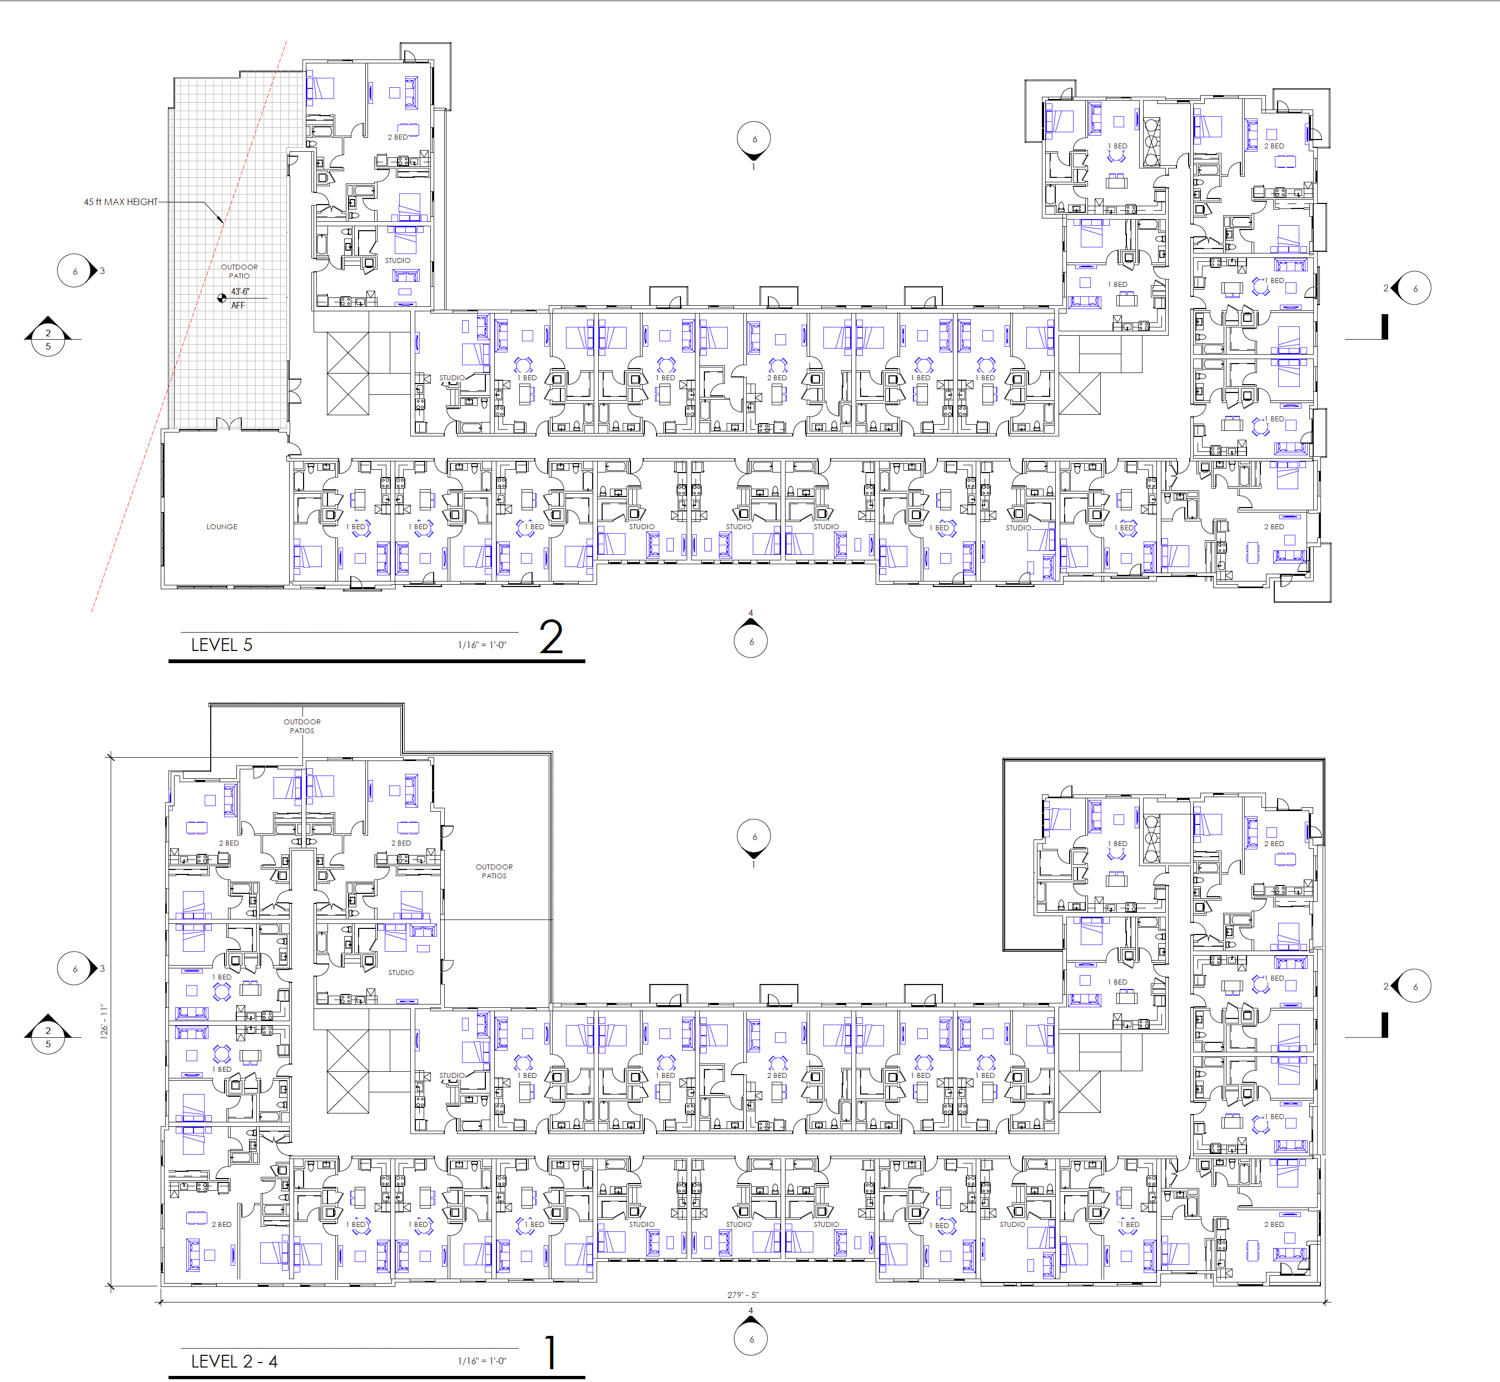 8581 Folsom Boulevard floor plans for levels two through five, rendering by HRGA